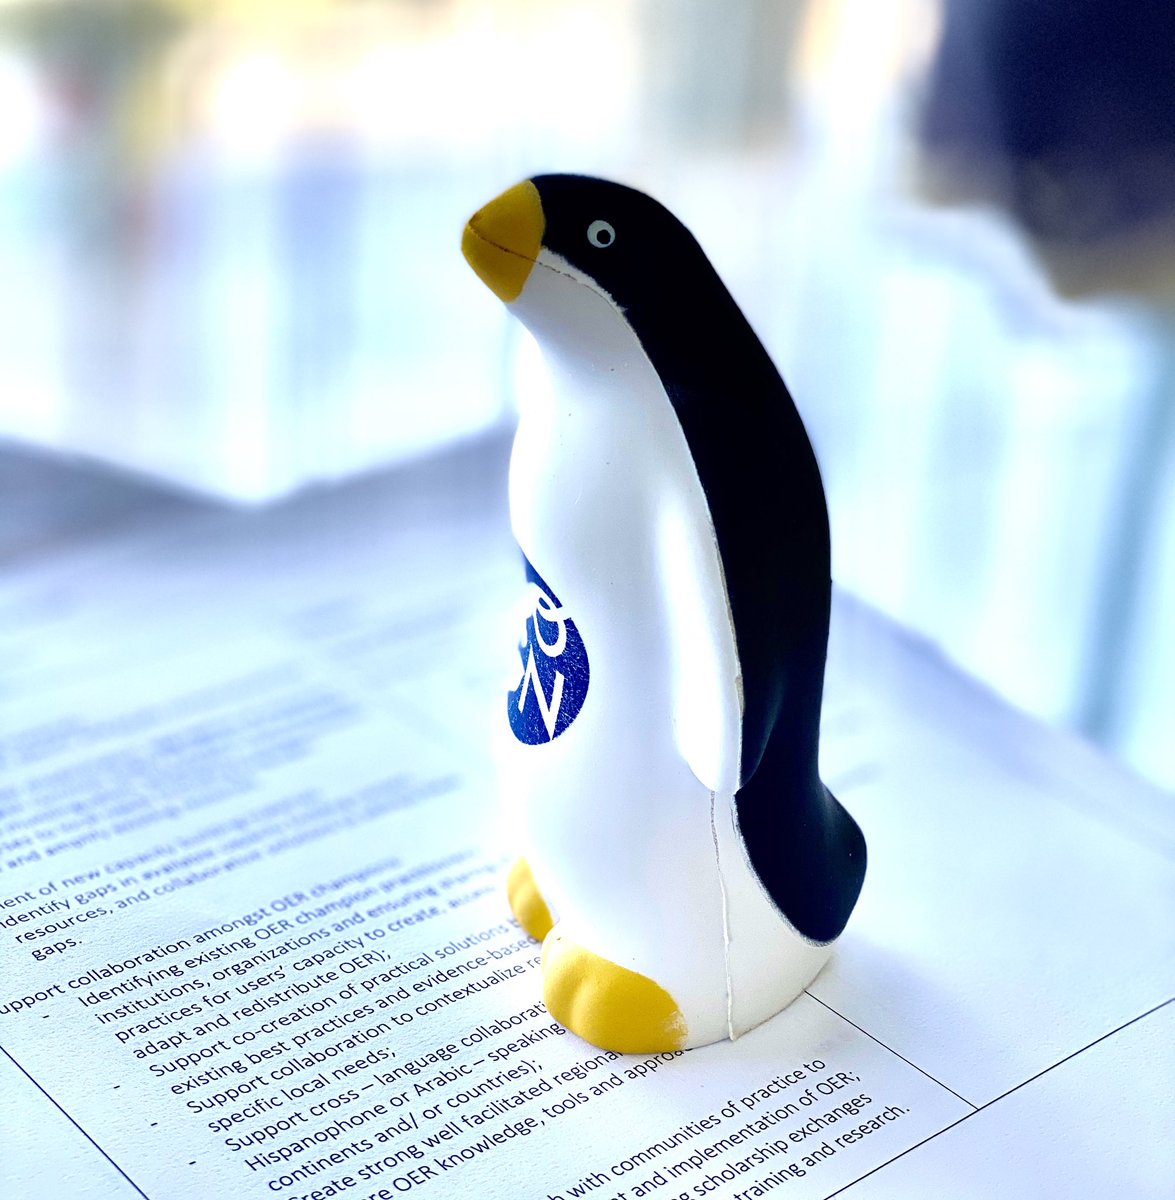 ⁦@GOGN_OER⁩ penguin (with compliments from ⁦@philosopher1978⁩ during #oeglobal19) keeping me company as I take stock of my #phd research data assets & journey and planning the way forward :)